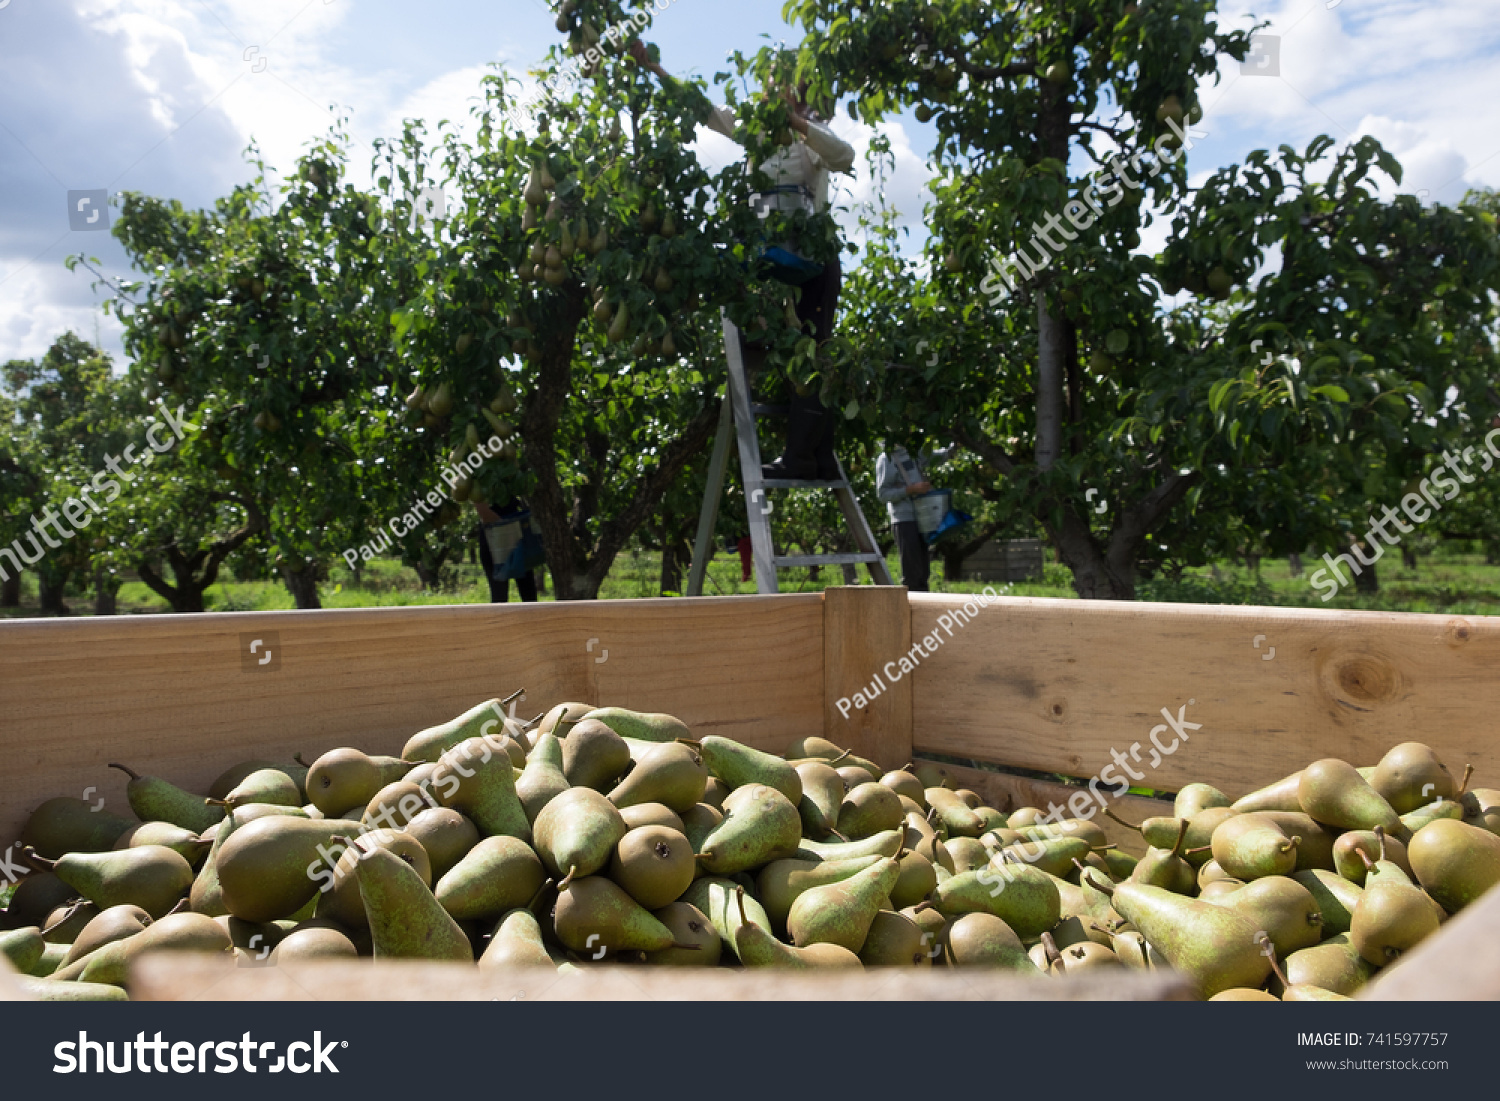 Pears in wooden crate #741597757